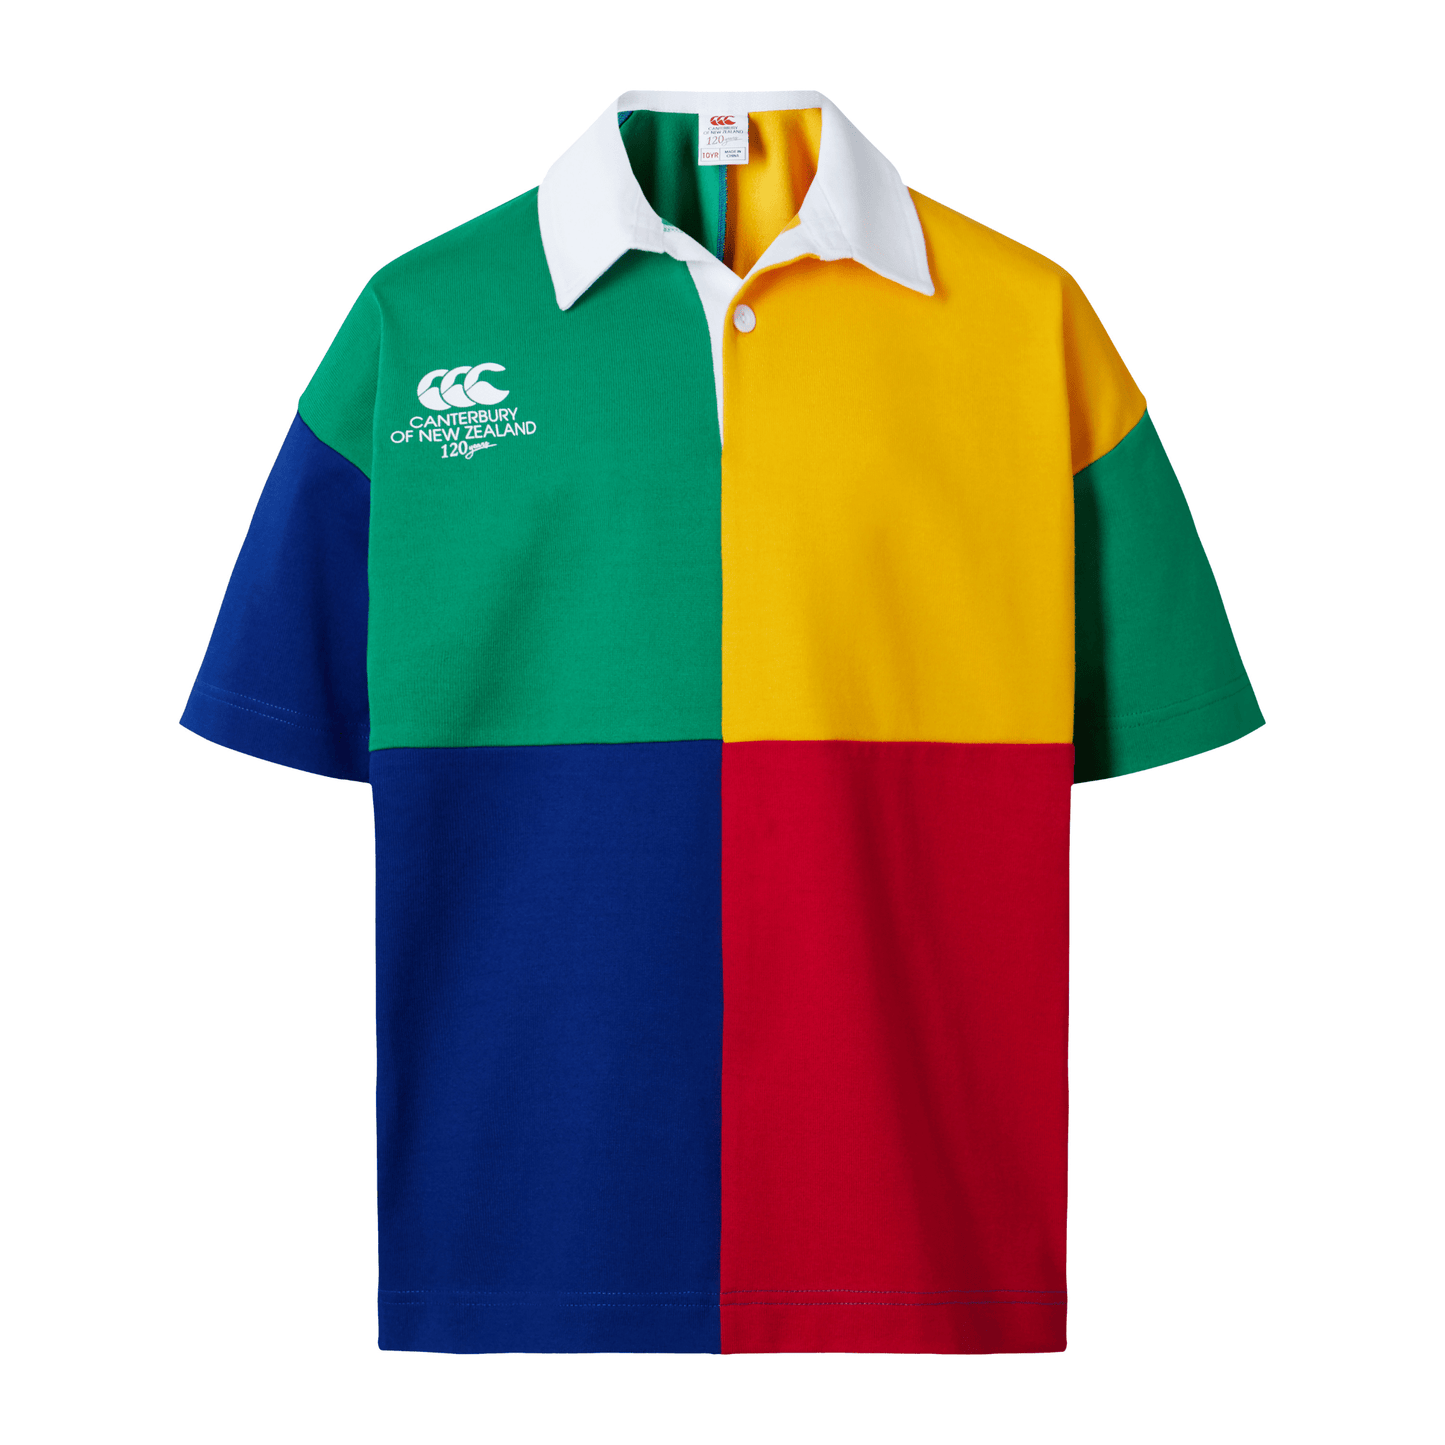 
                  
                    Canterbury Kids 120 Years Short Sleeve Rugby Jersey (Unisex)
                  
                